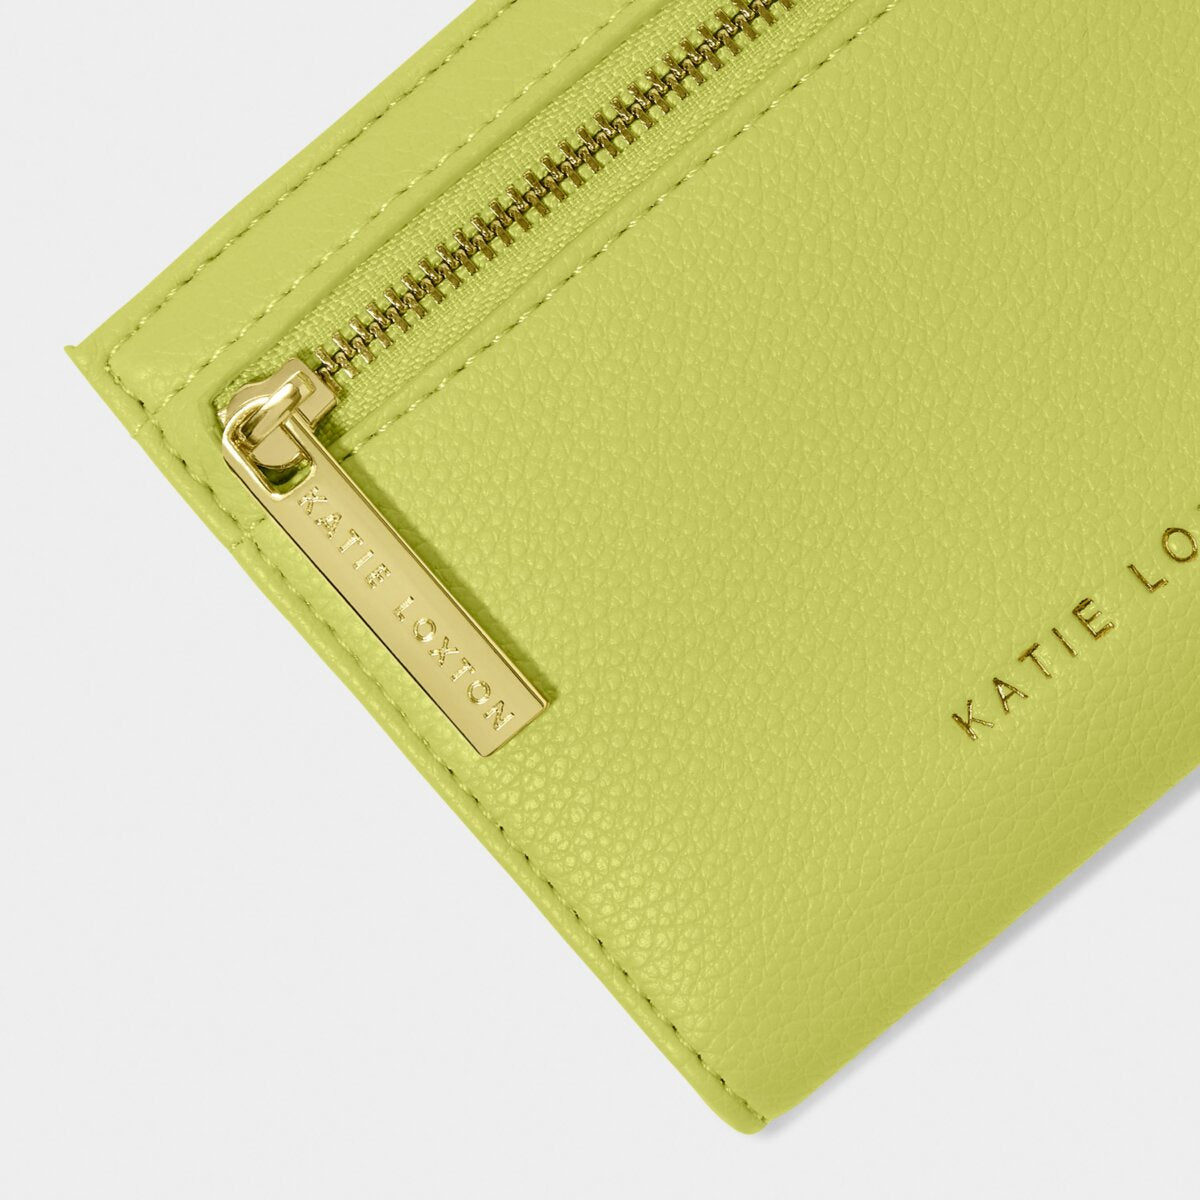 Close up of the Katie Loxton Jayde Purse in Lime Green, focussing on the zipper, which says Katie Loxton and the Katie Loxton gold foil print at the base of the purse.